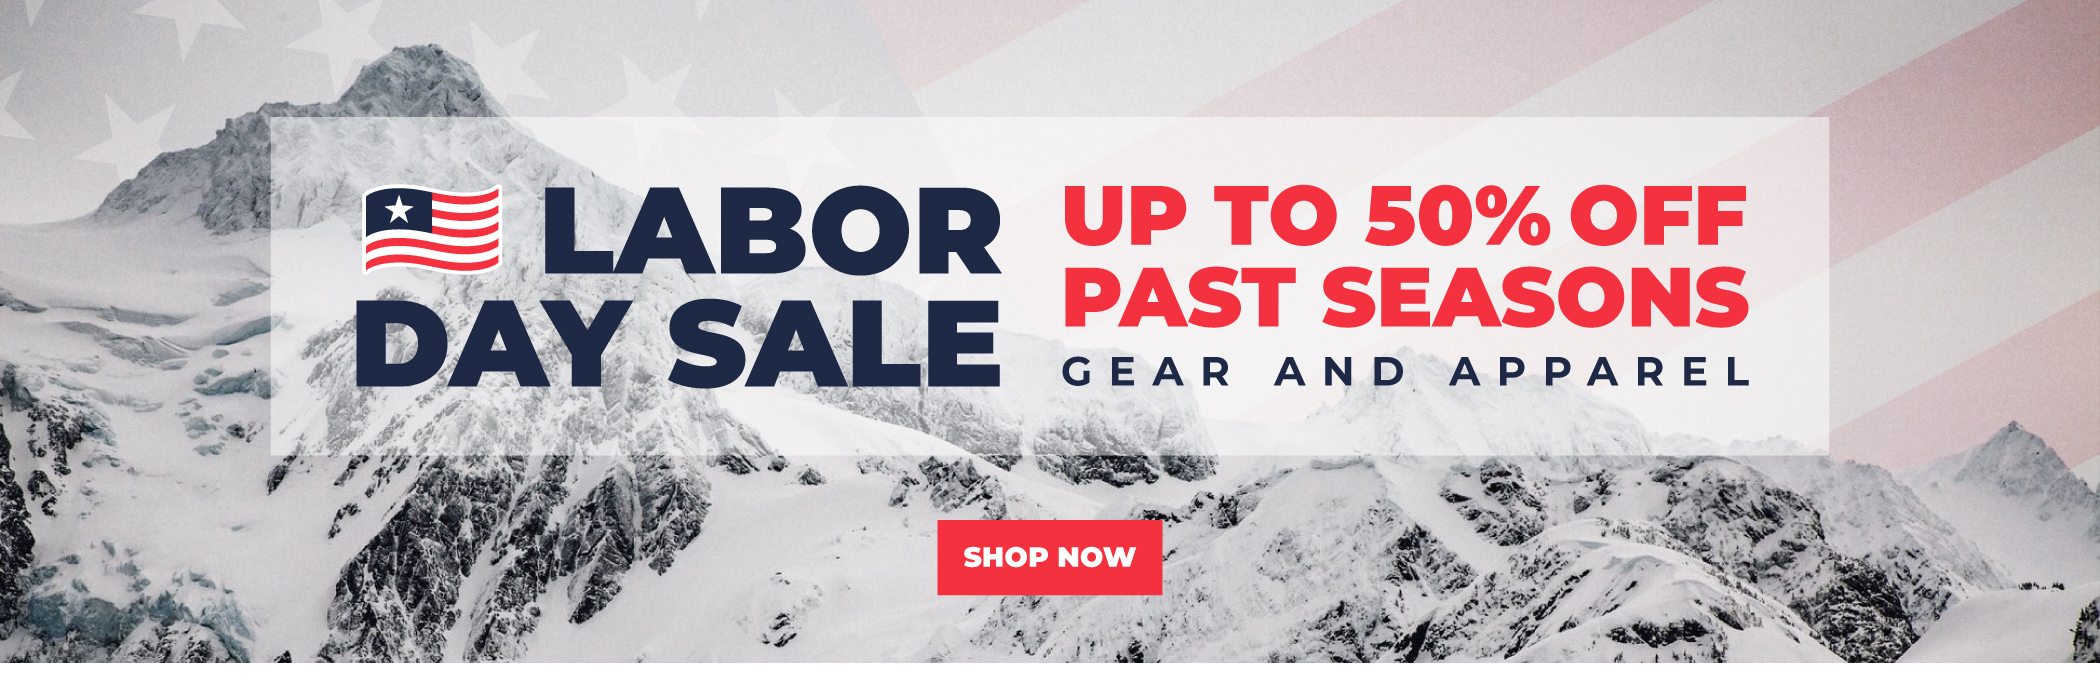 LABOR DAY SALE - FOOTER